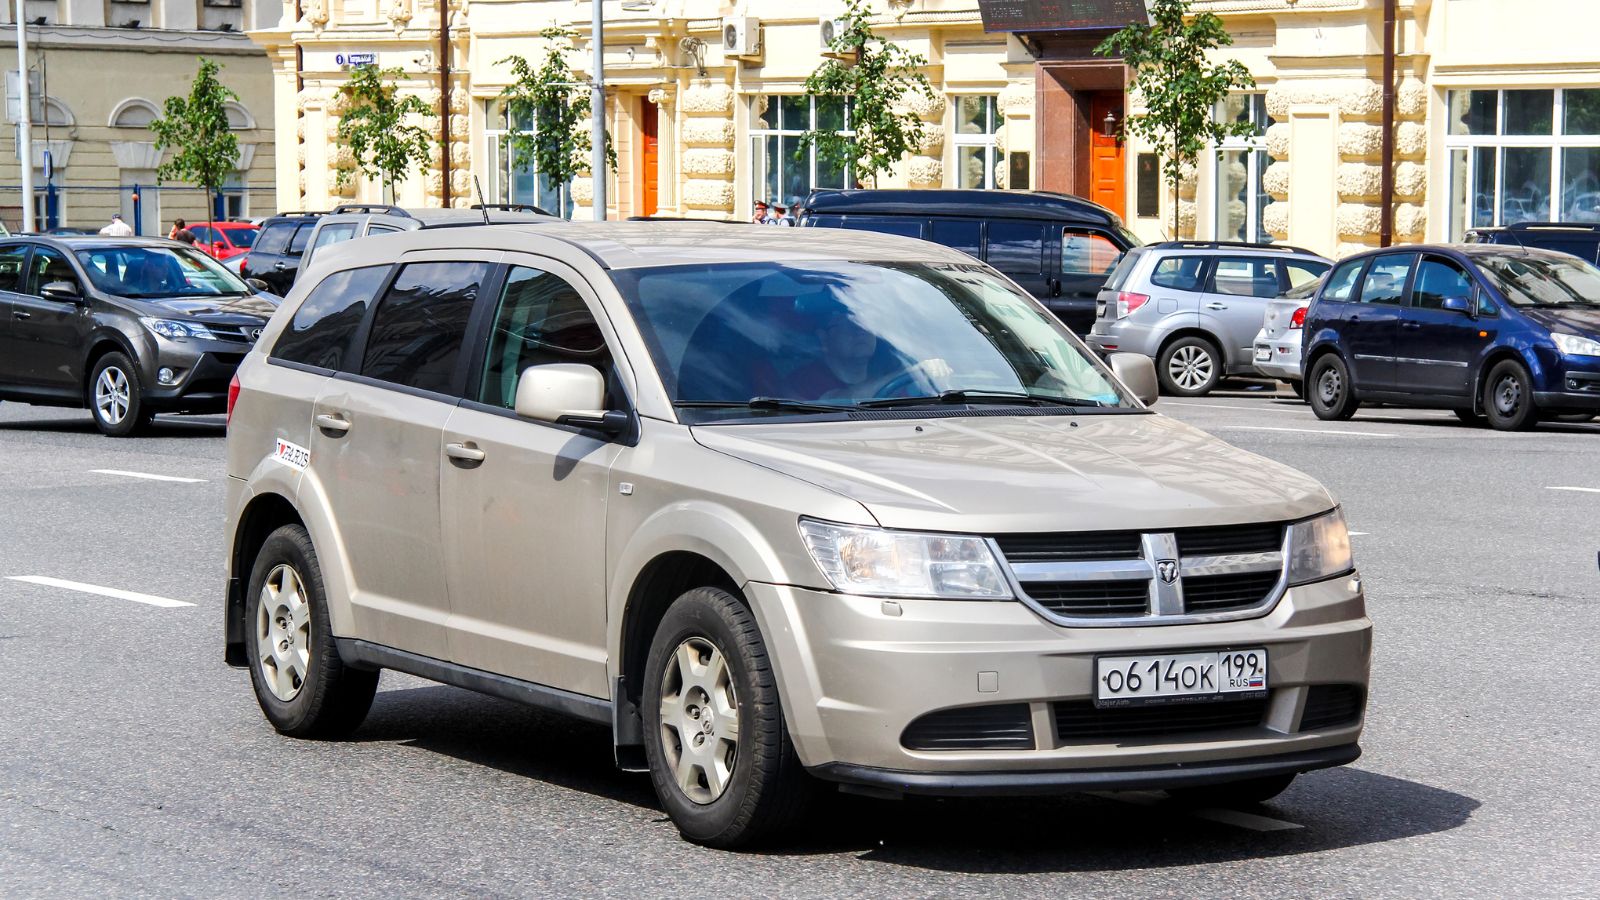 <p>The Dodge Journey is a popular choice for families due to its spacious size and versatility, but out-of-warranty examples can be expensive to own and maintain. <a href="http://carparts.com">CarParts.com</a> warns that these vehicles are often plagued by “interior water leaks, a malfunctioning remote keyless entry system, an overheating engine, head gasket damage, and premature wear on brakes.”</p>